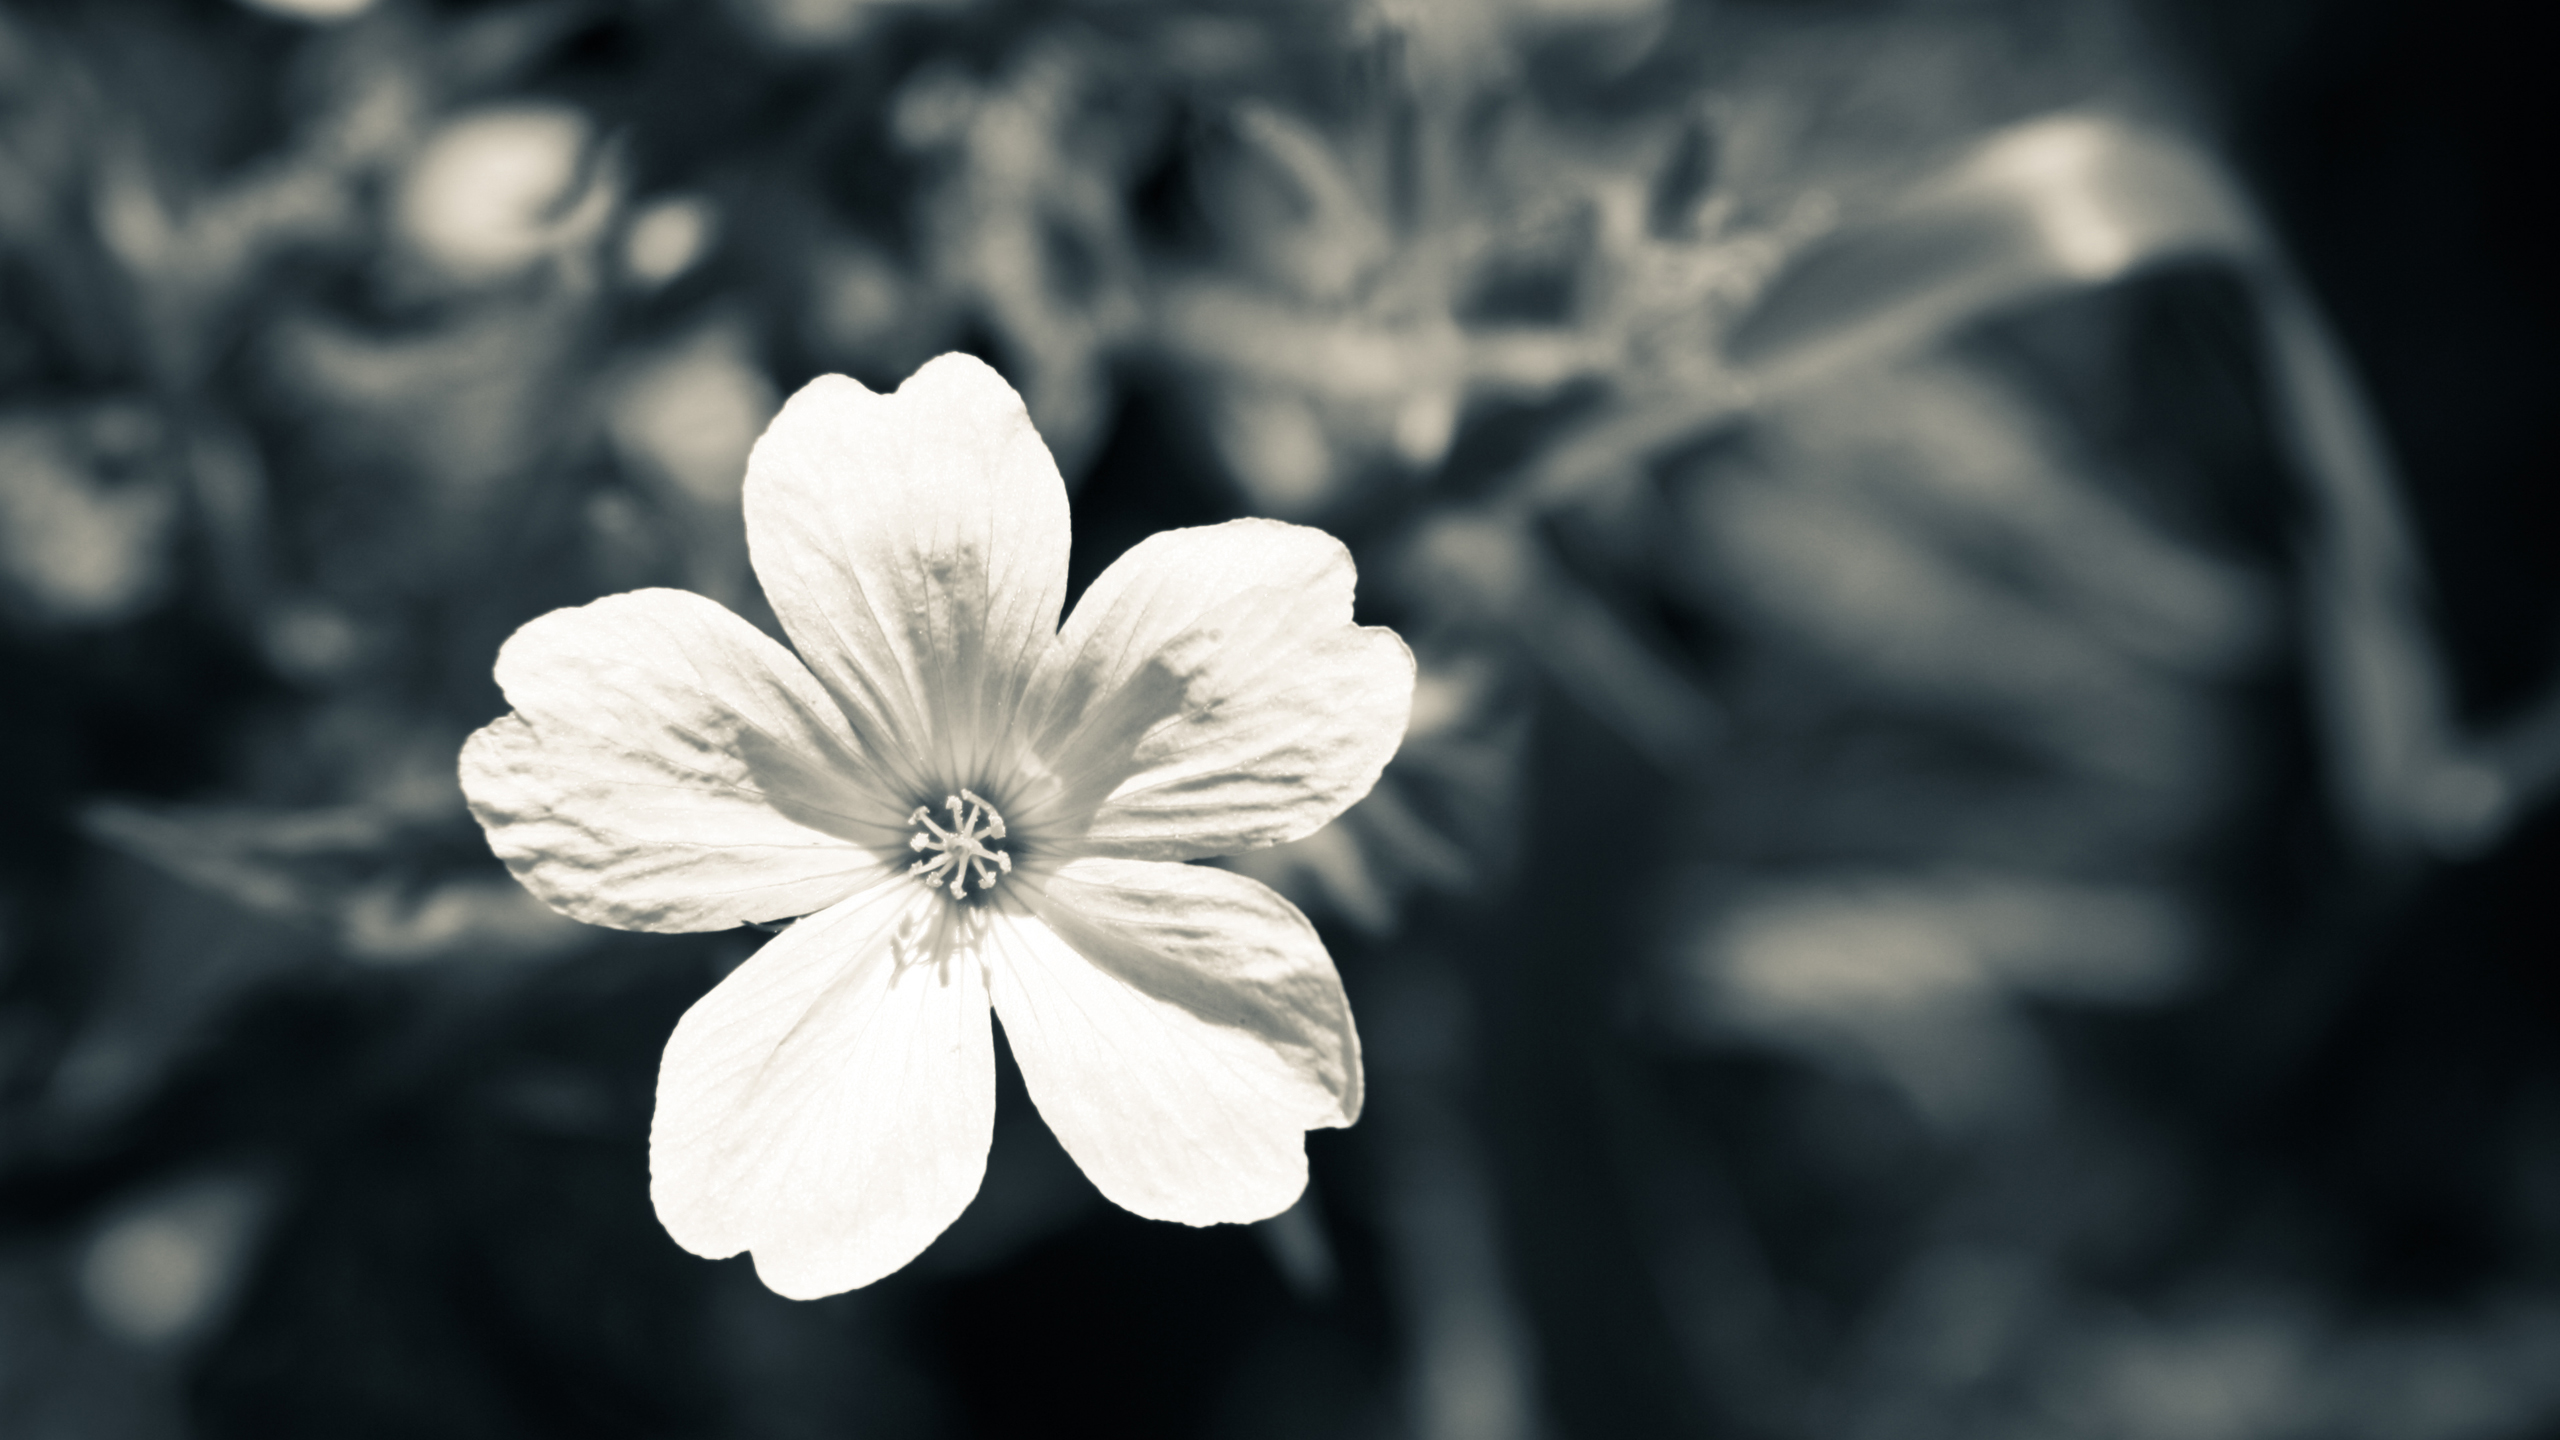 Black And White Flower Wallpaper HD Res